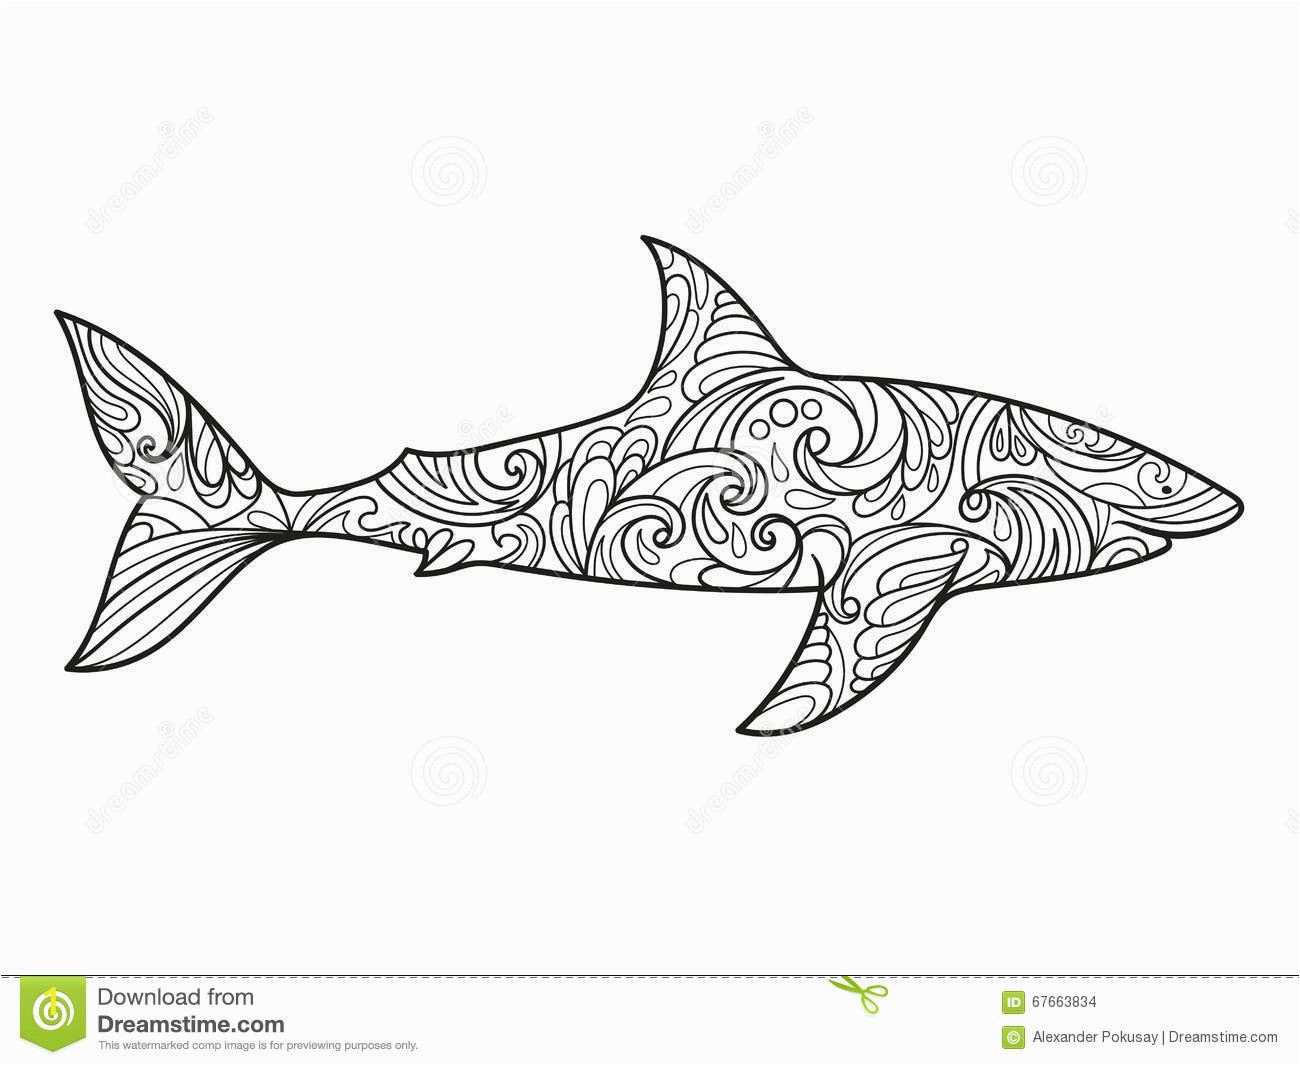 shark coloring book adults vector illustration anti stress adult zentangle style black white lines lace